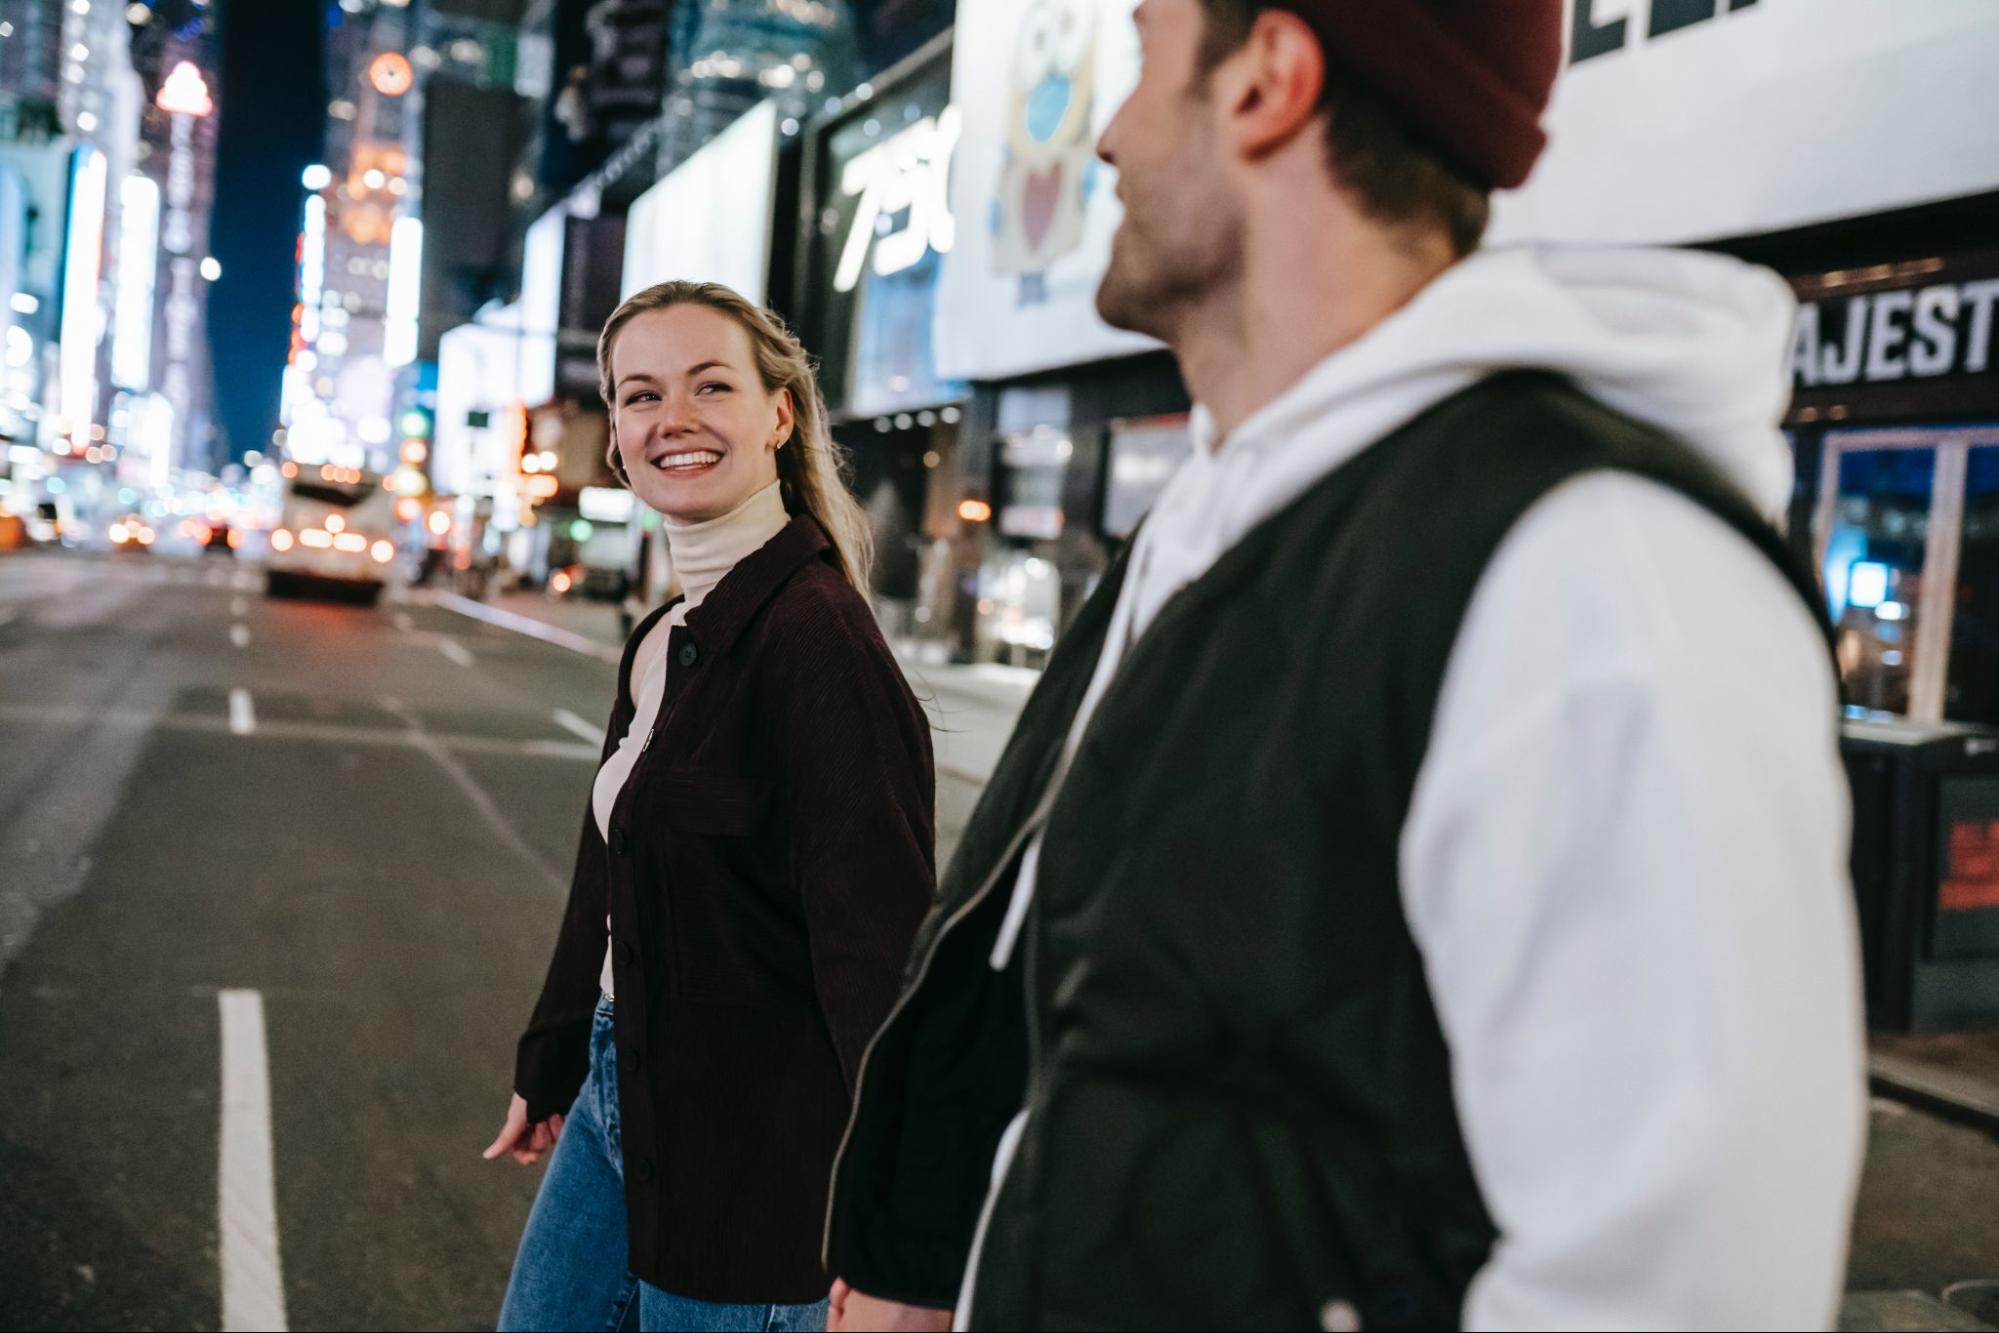 happy daters walking down NYC streets